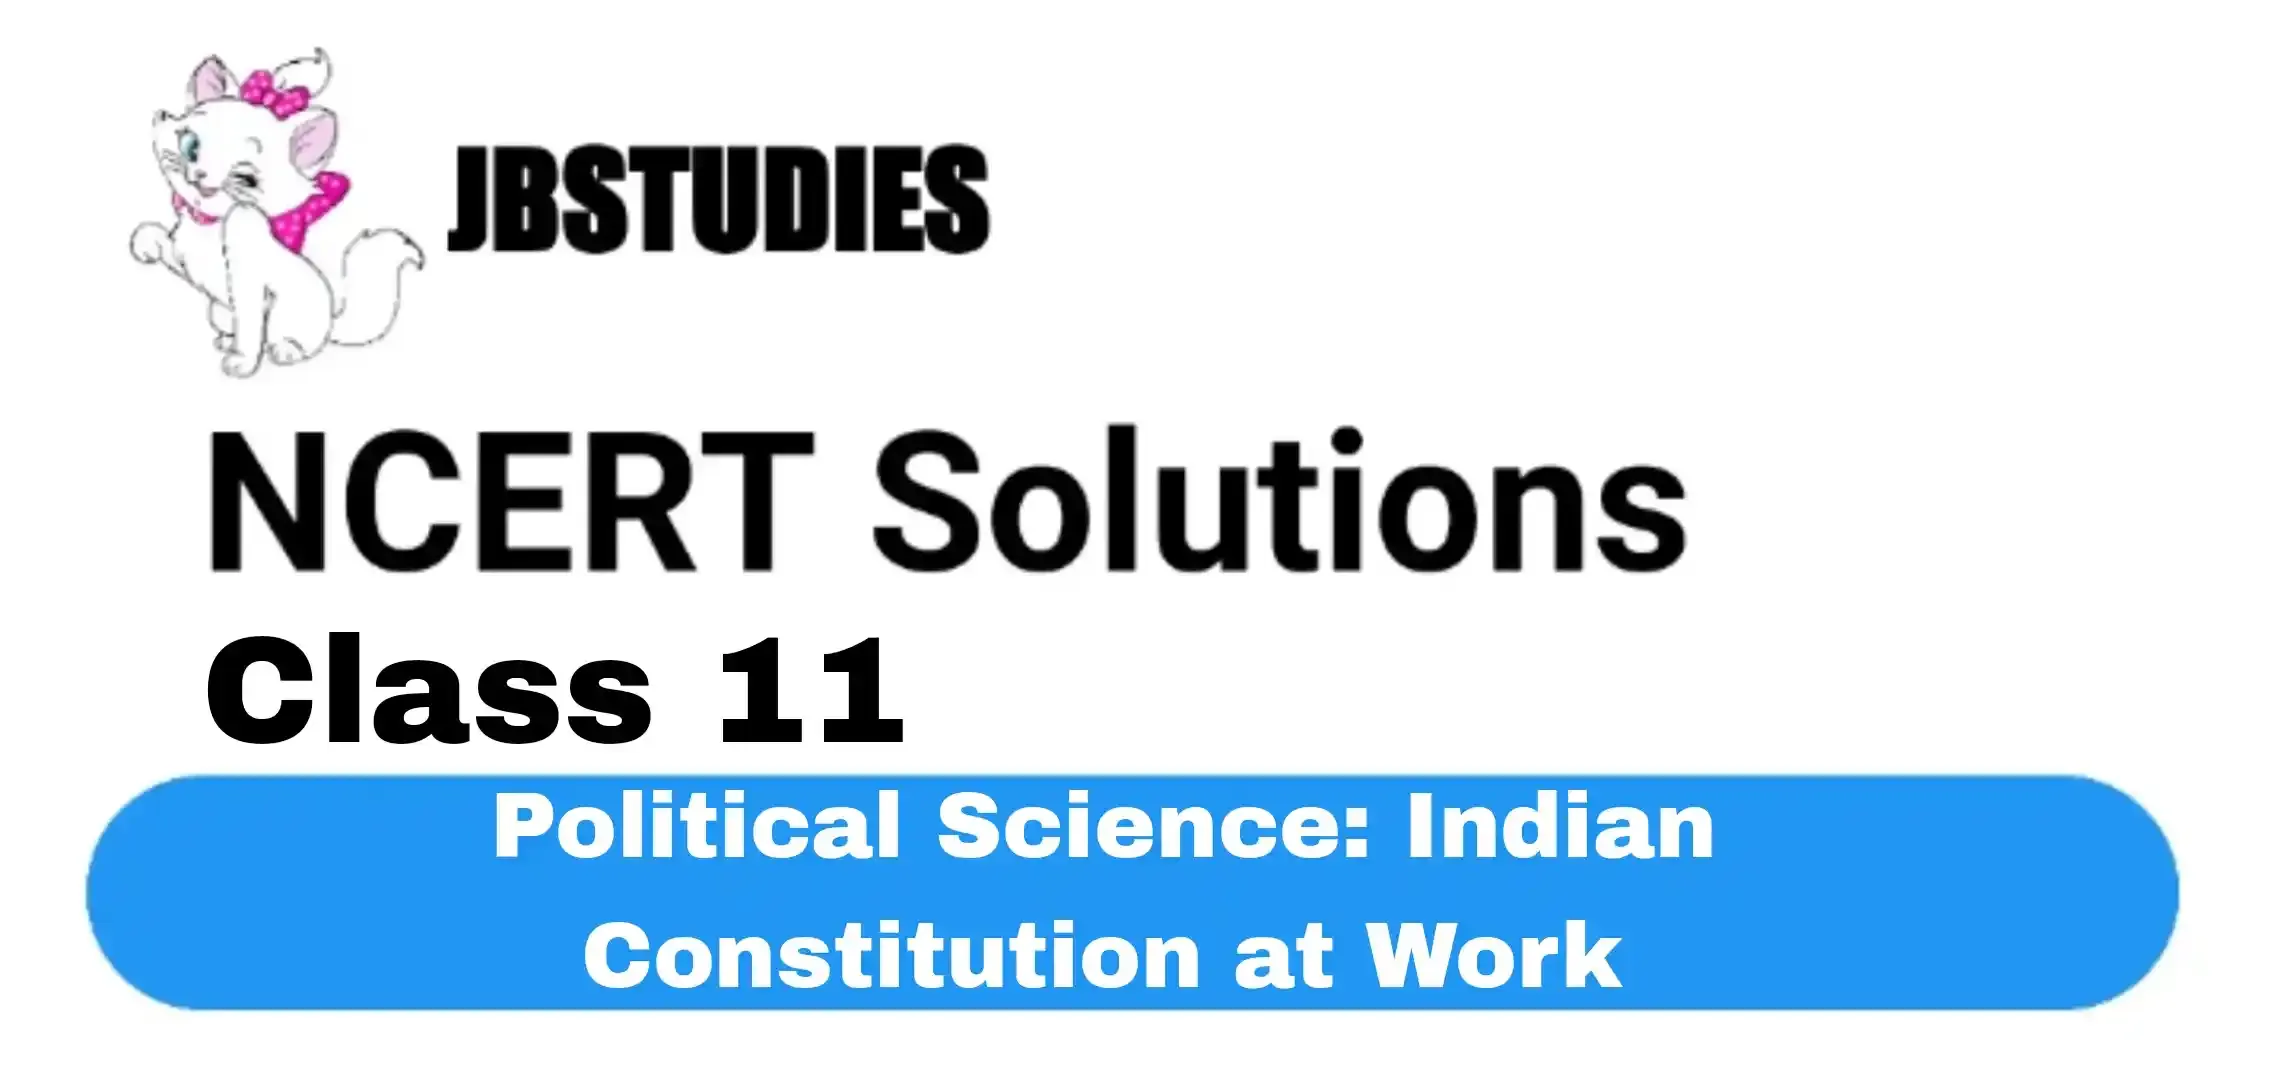 NCERT Solutions Class 11 Political Science